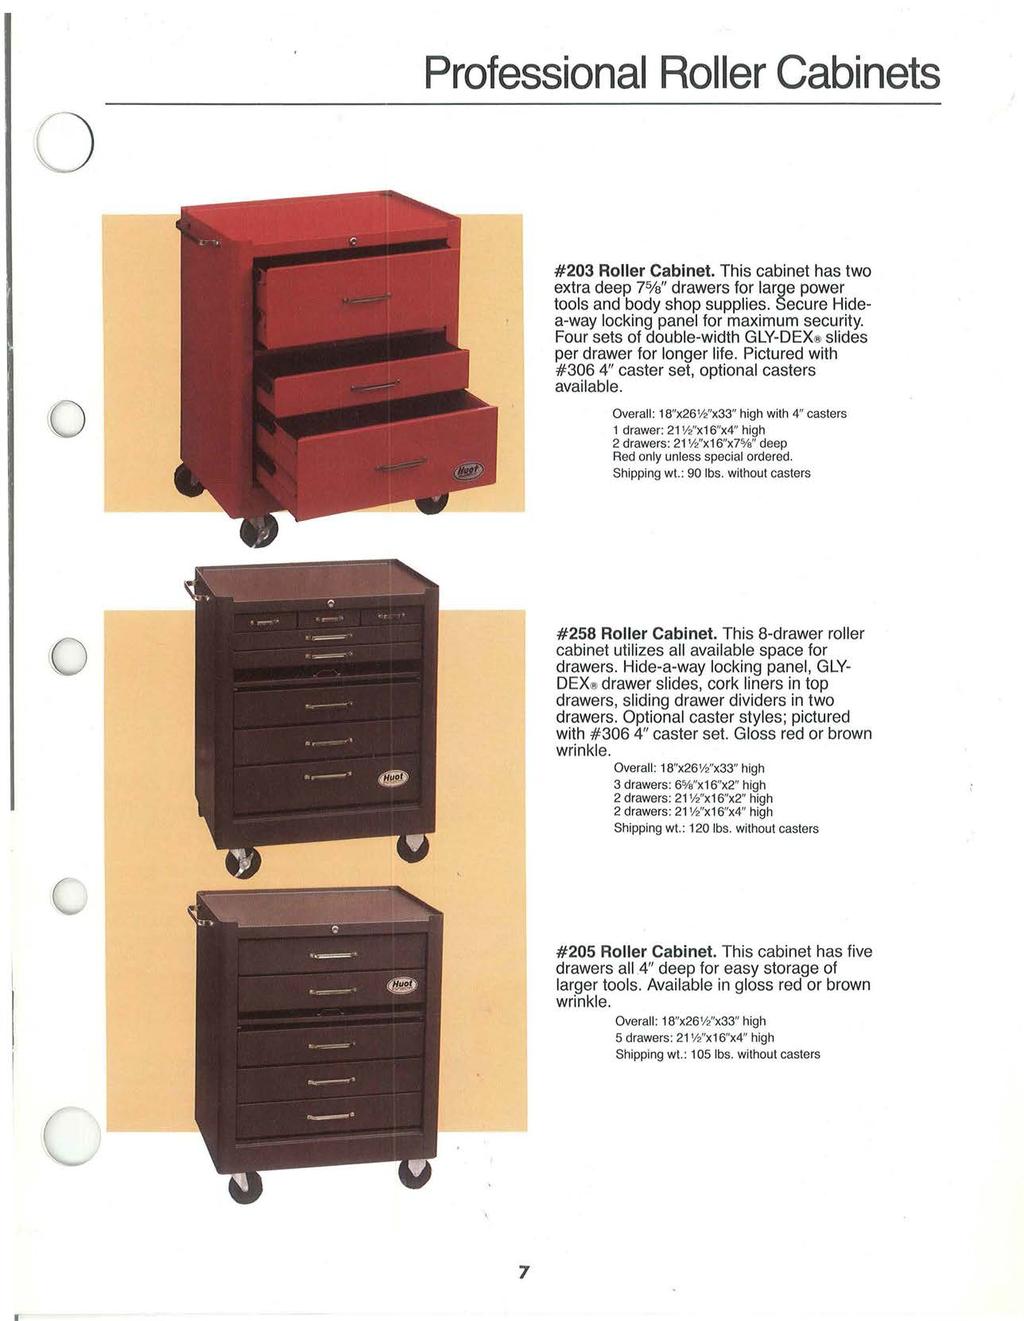 Professional Roller Cabinets 0 #203 Roller Cabinet. This cabinet has two extra deep 7%" drawers for large power tools and body shop supplies. Secure Hidea-way locking panel for maximum security.